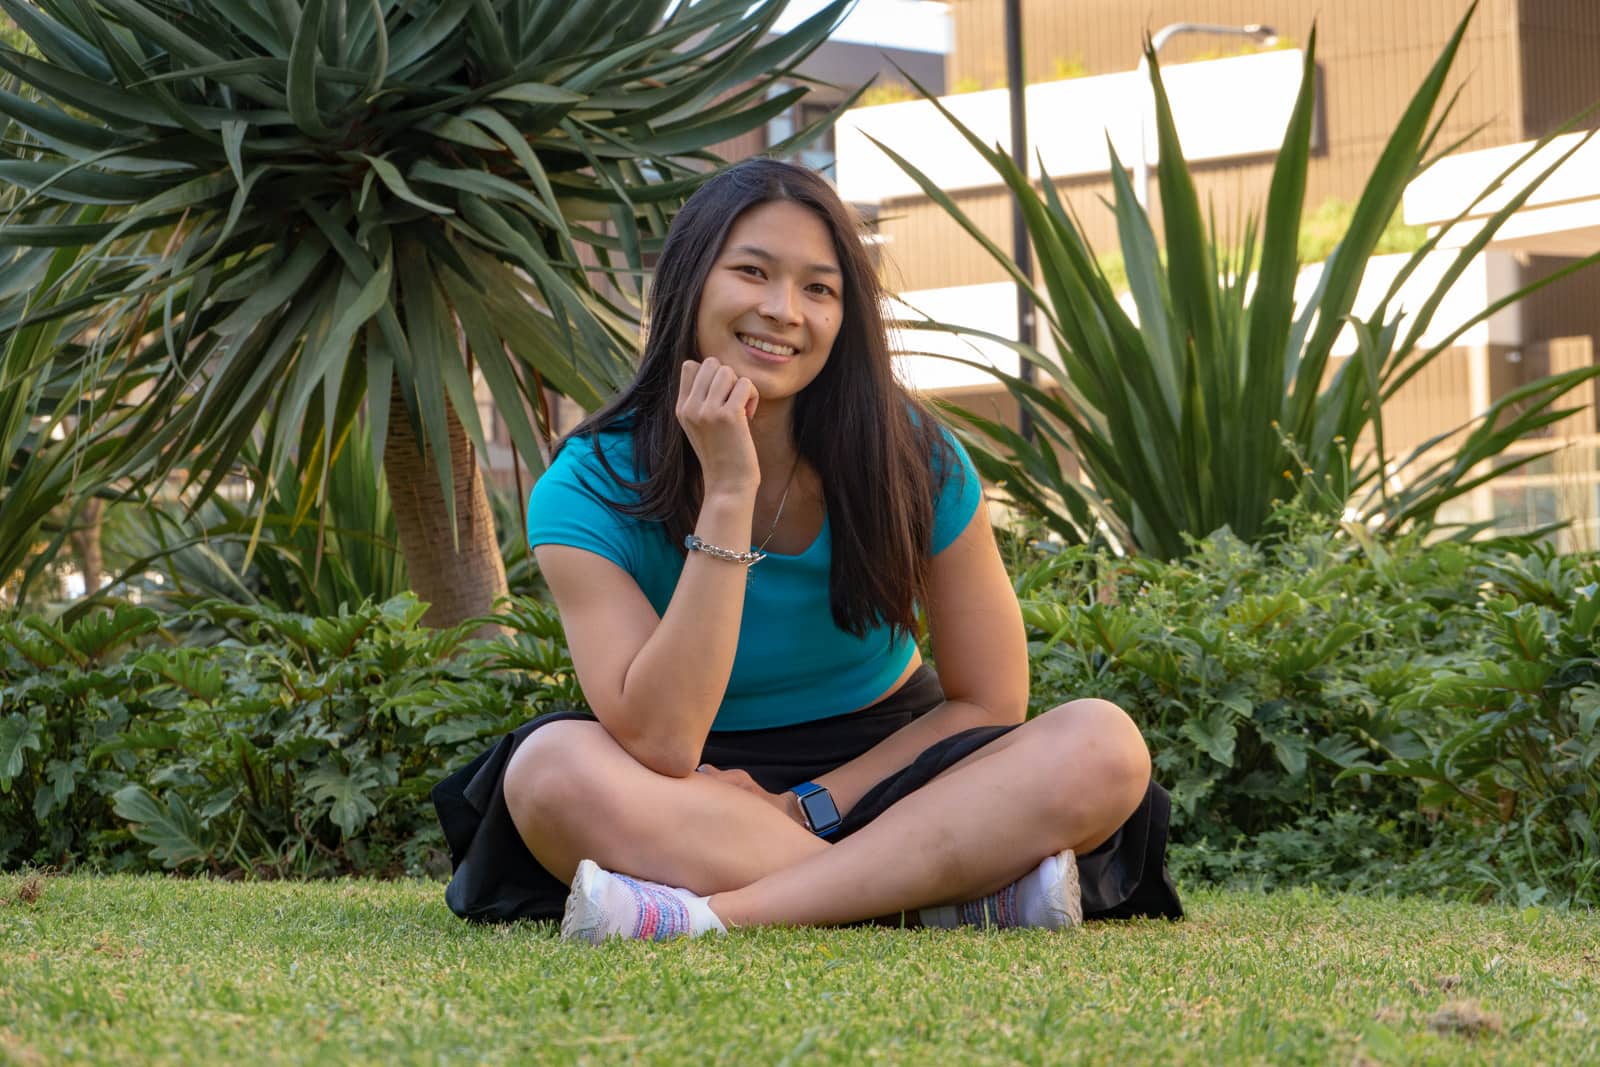 A woman with medium length dark hair, wearing a turquoise tee and a black skirt, sitting cross-legged on the grass. There are some spiky plants behind her. She is resting her chin on her hand and the elbow of that arm is propped on one of her knees.